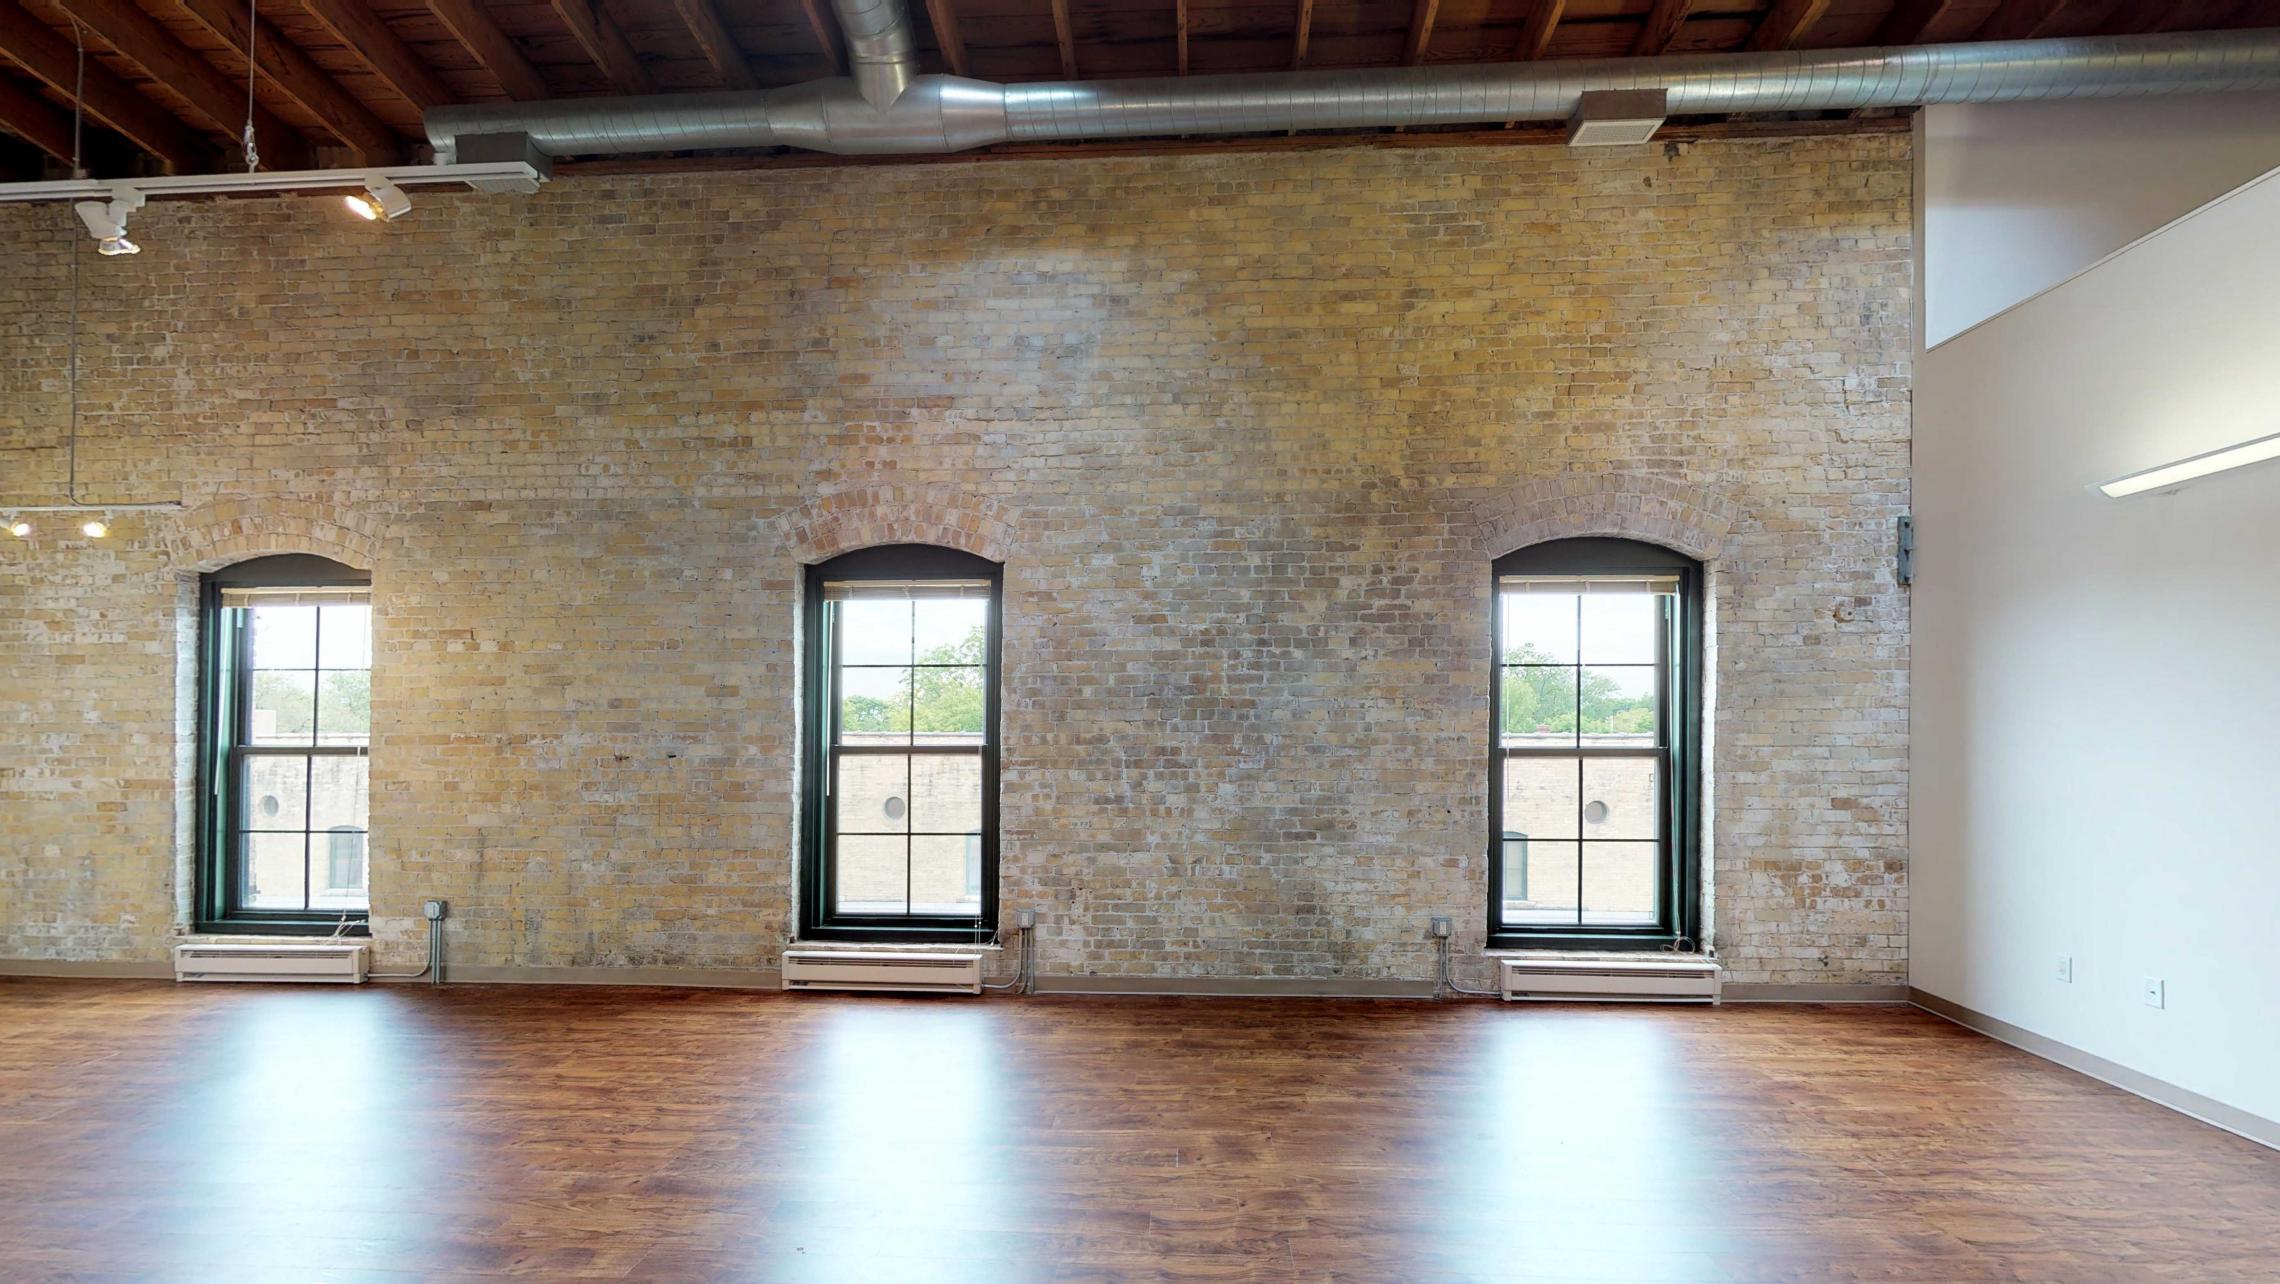 Tobacco-Lofts-Apartment-E306-Two-Bedroom-Lofted-Historic-Madison-Downtown-Exposures-Yards-Stunning-Design.jpg